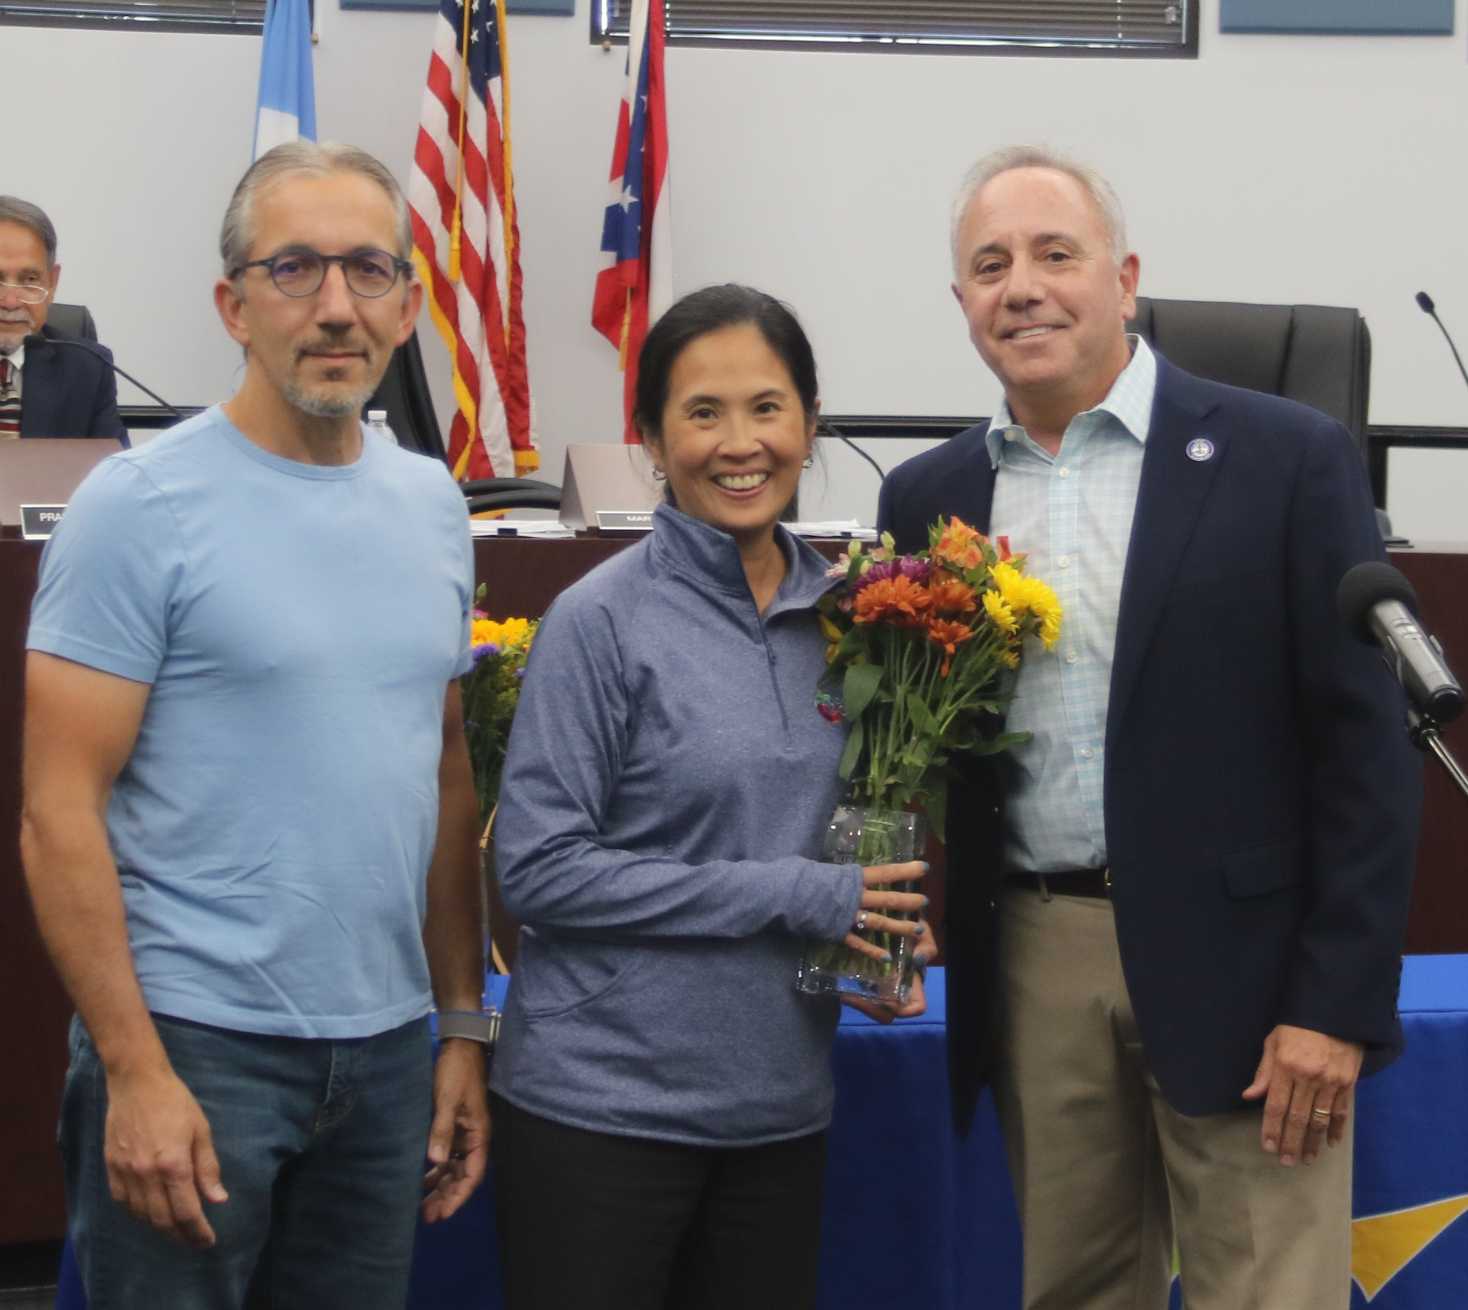 Mr. and Mrs. Wallace with flowers and Mayor Sirkin